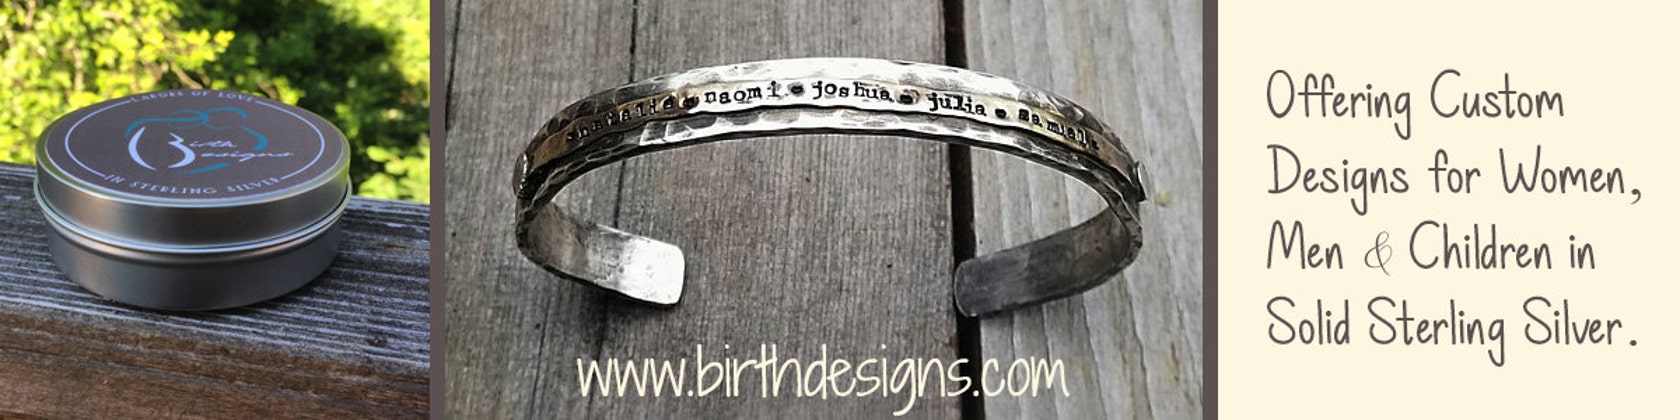 Hand-Forged Custom Sterling Silver Jewelry by birthdesigns on Etsy